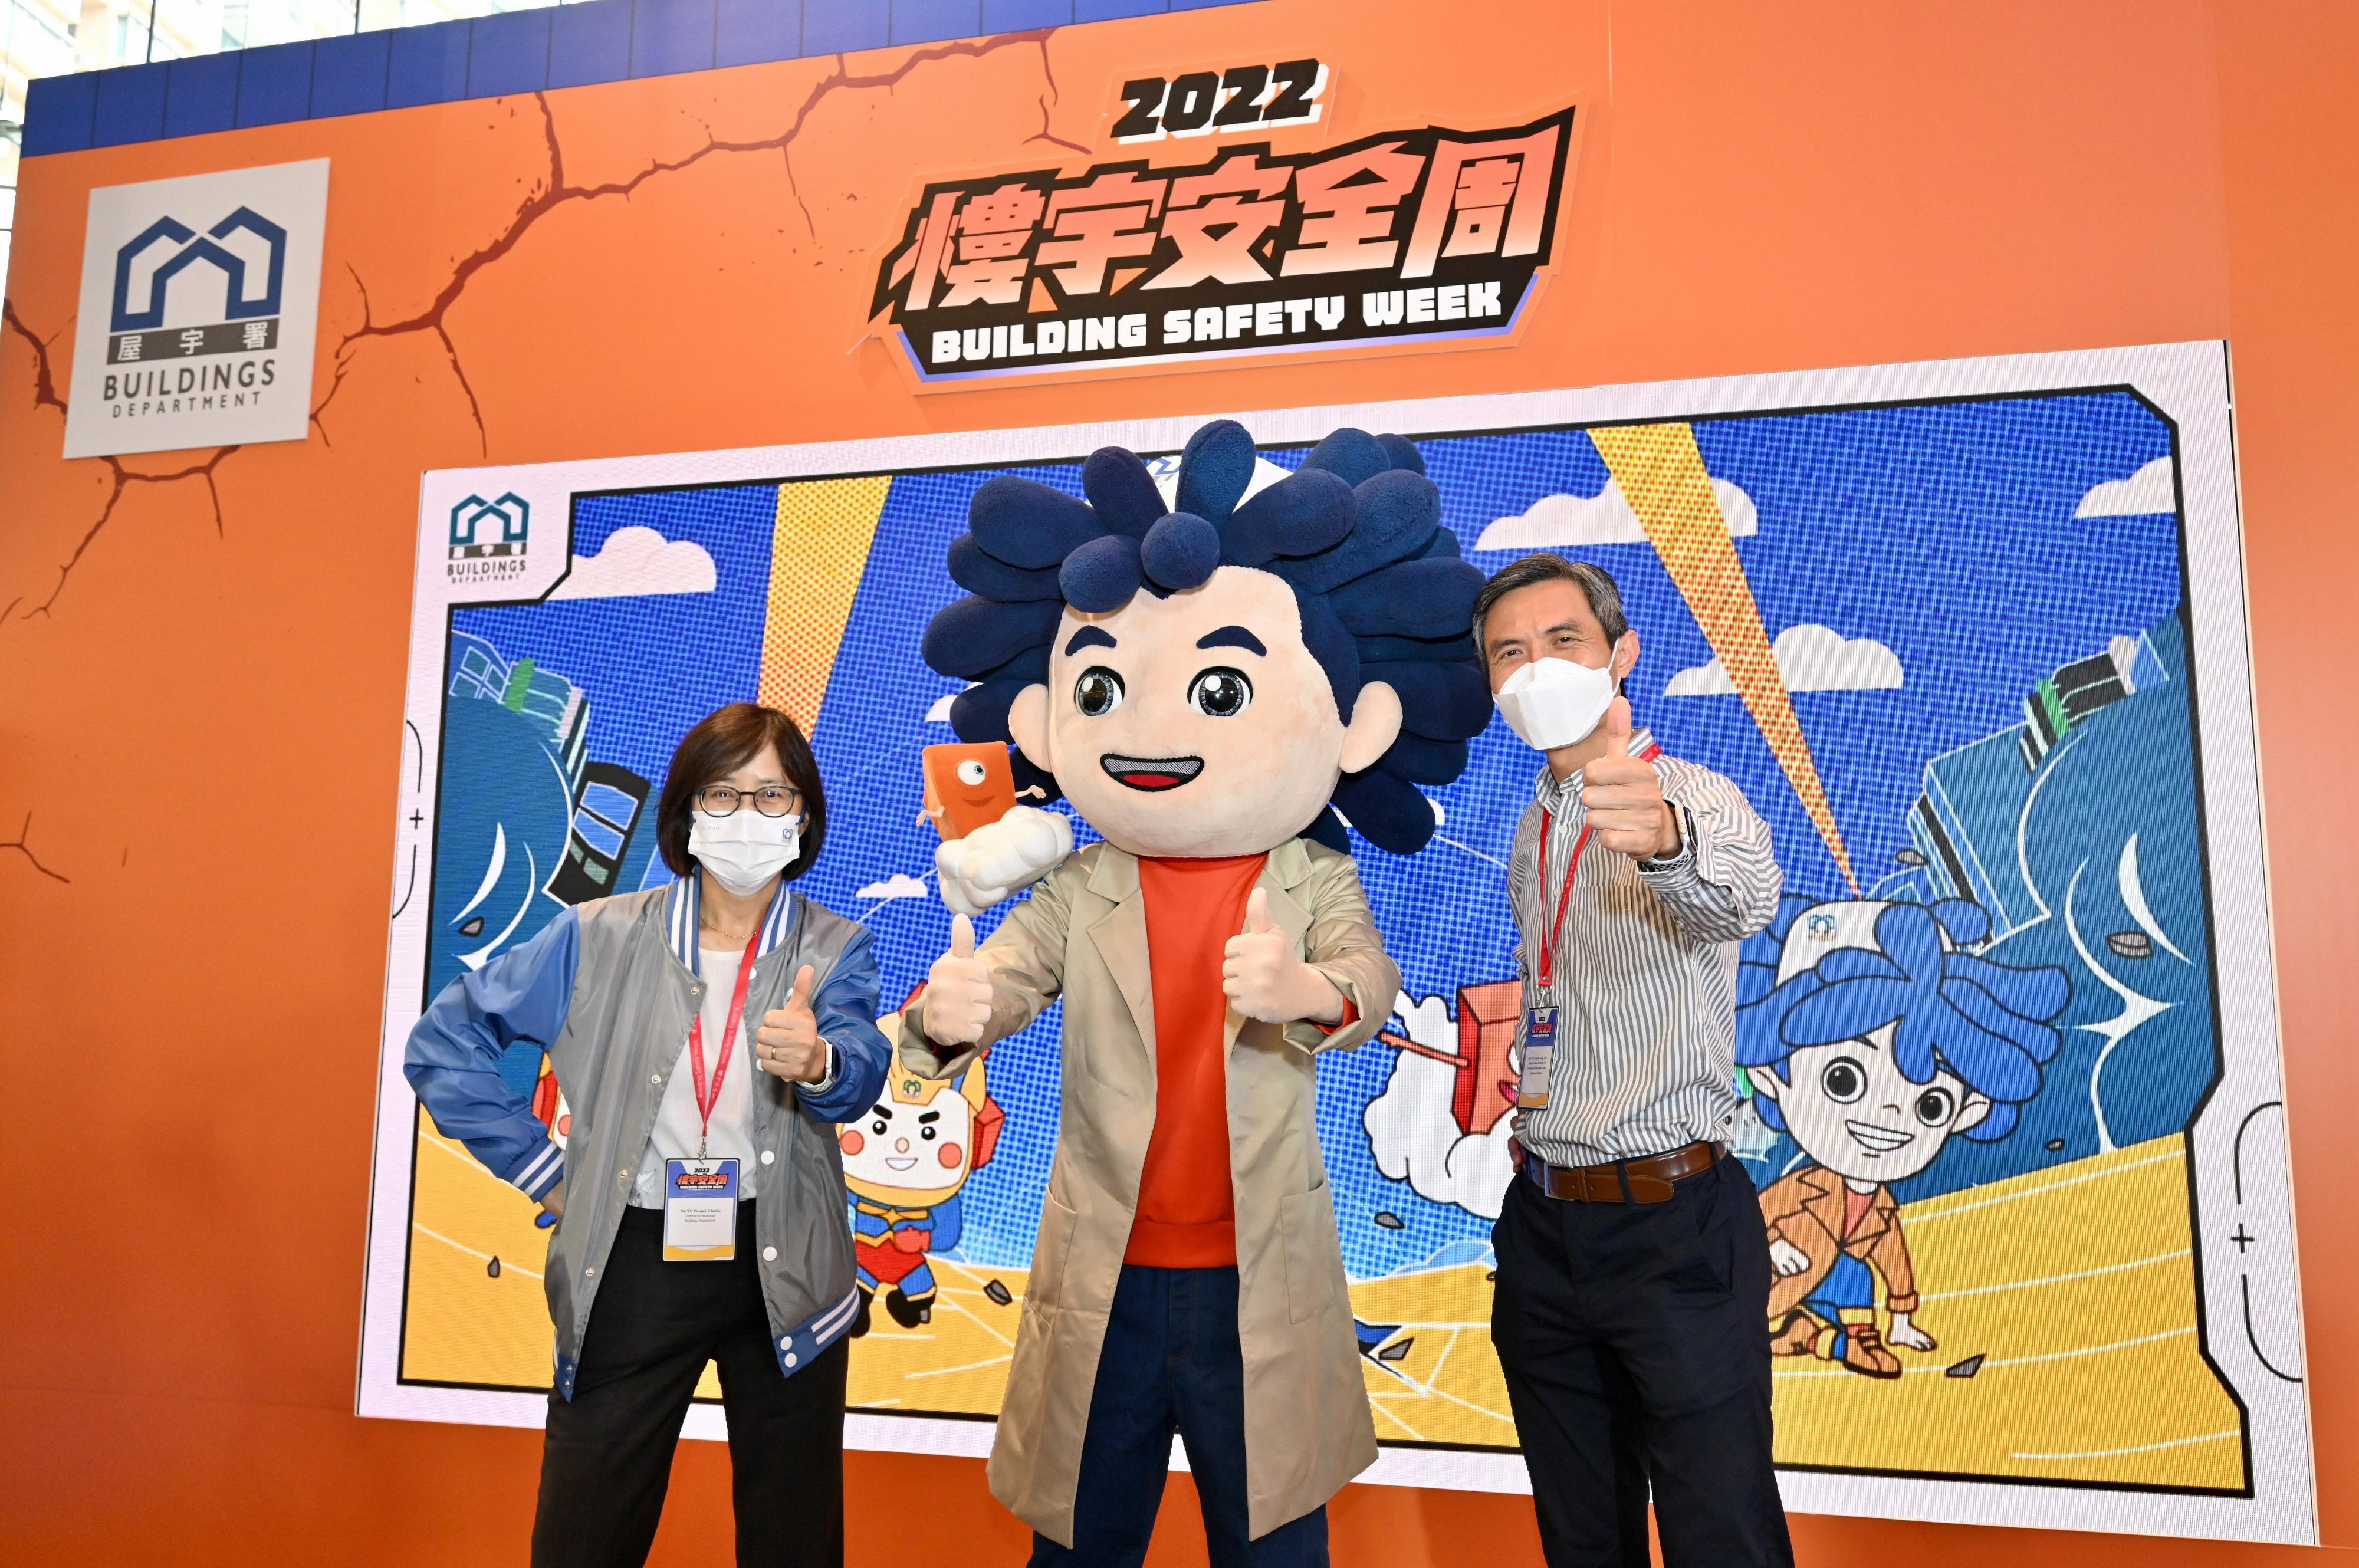 The Acting Permanent Secretary for Development (Planning and Lands), Mr Vic Yau (right), and the Director of Buildings, Ms Clarice Yu, are pictured with mascots of the Buildings Department Ah Build and Ah Ding (Building Genie) after the opening ceremony of Building Safety Week 2022 today (October 22).